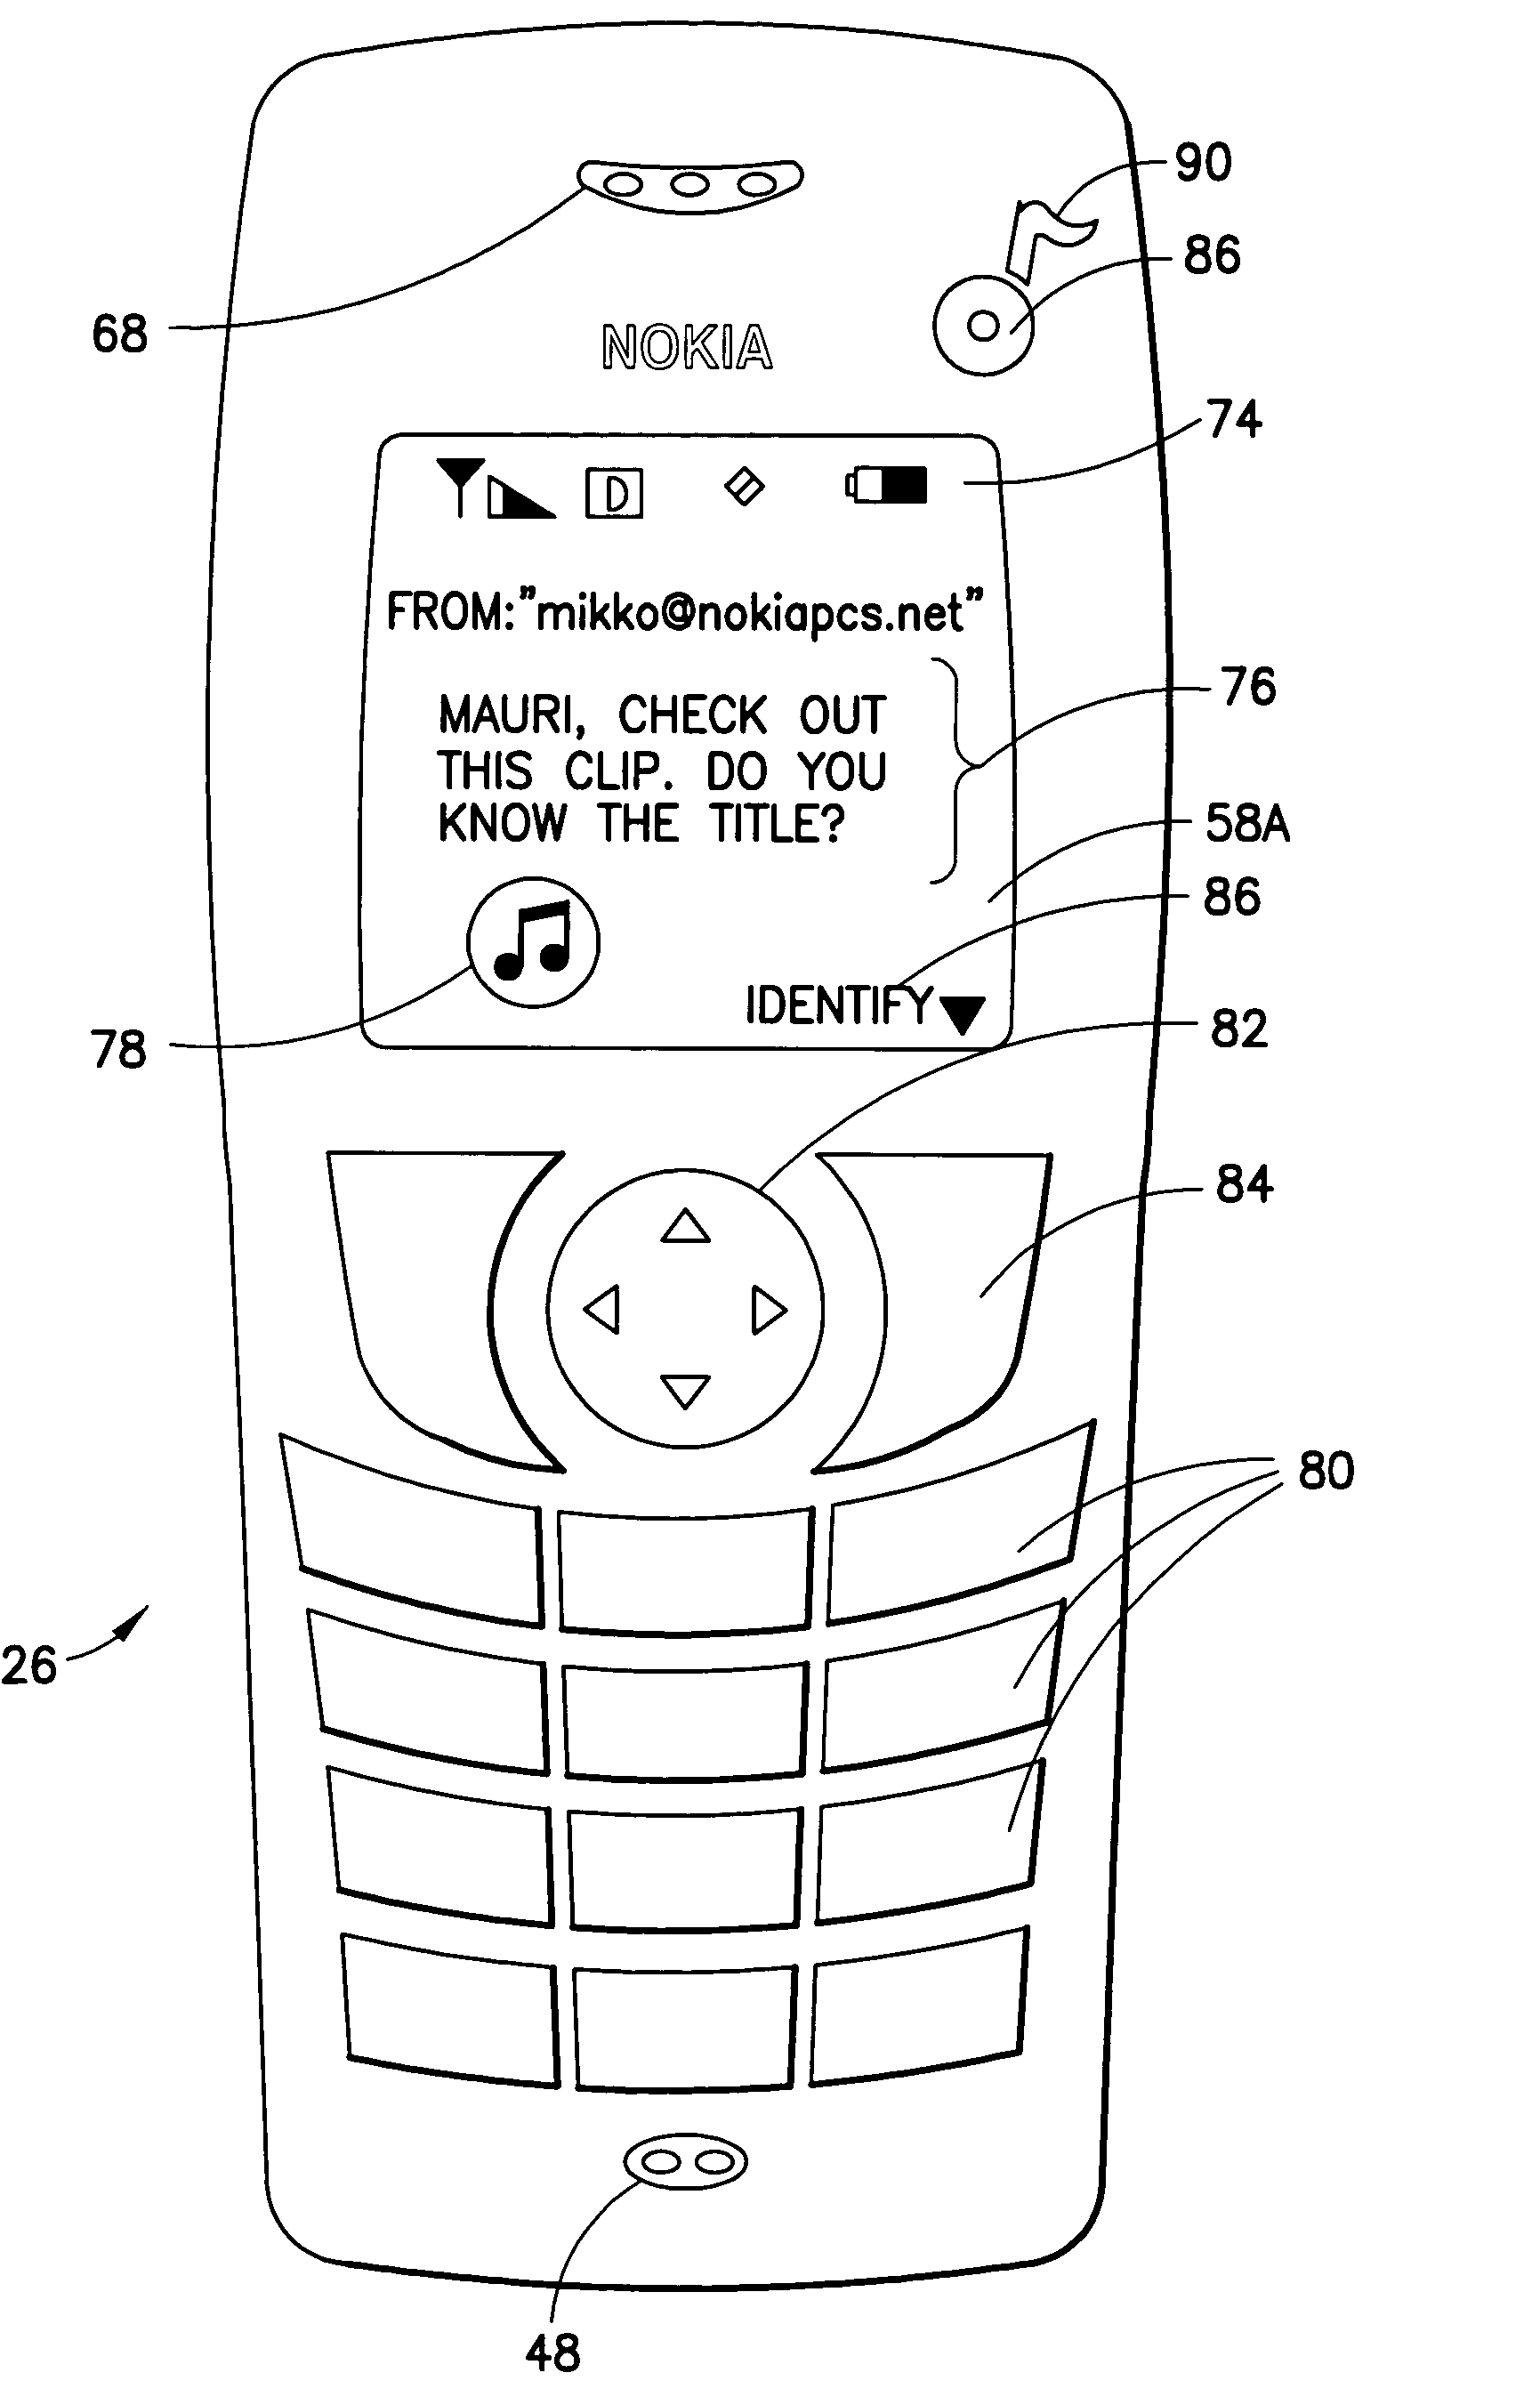 Mobile station and interface adapted for feature extraction from an input media sample